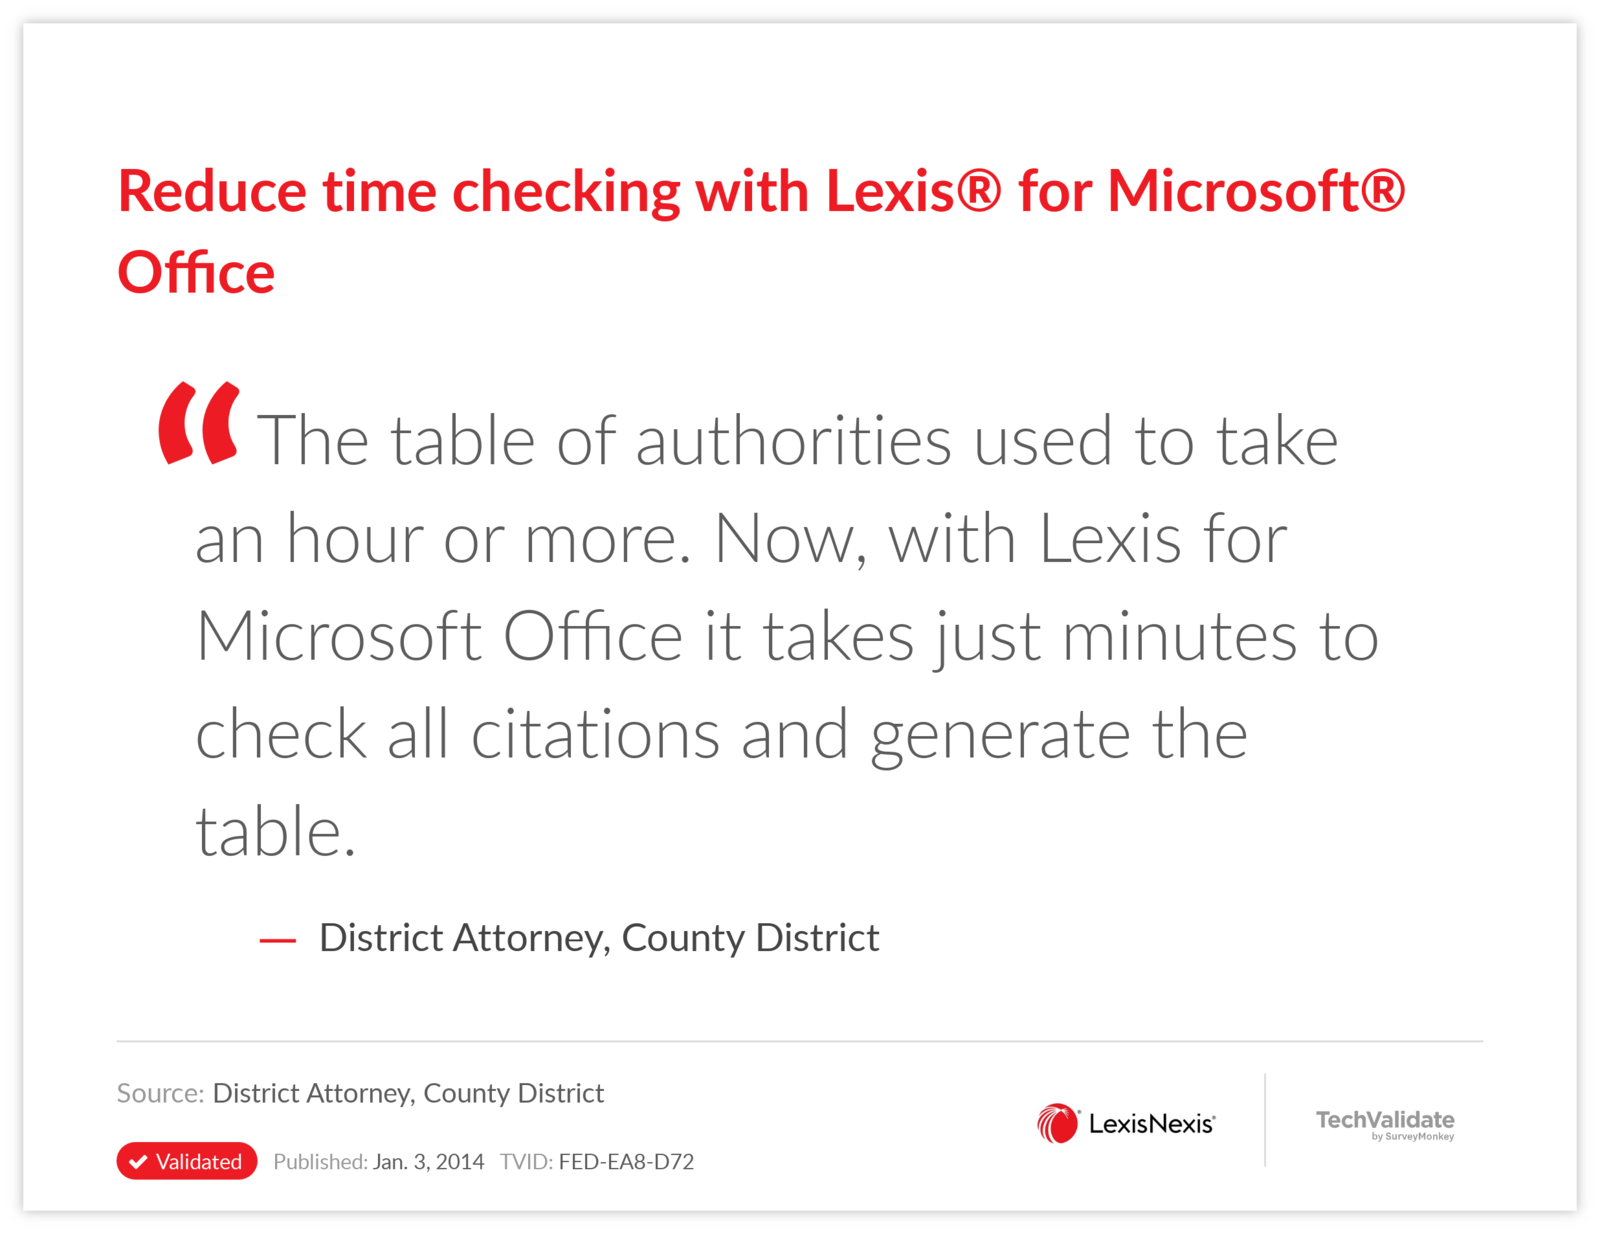 Reduce time checking with Lexis® for Microsoft® Office